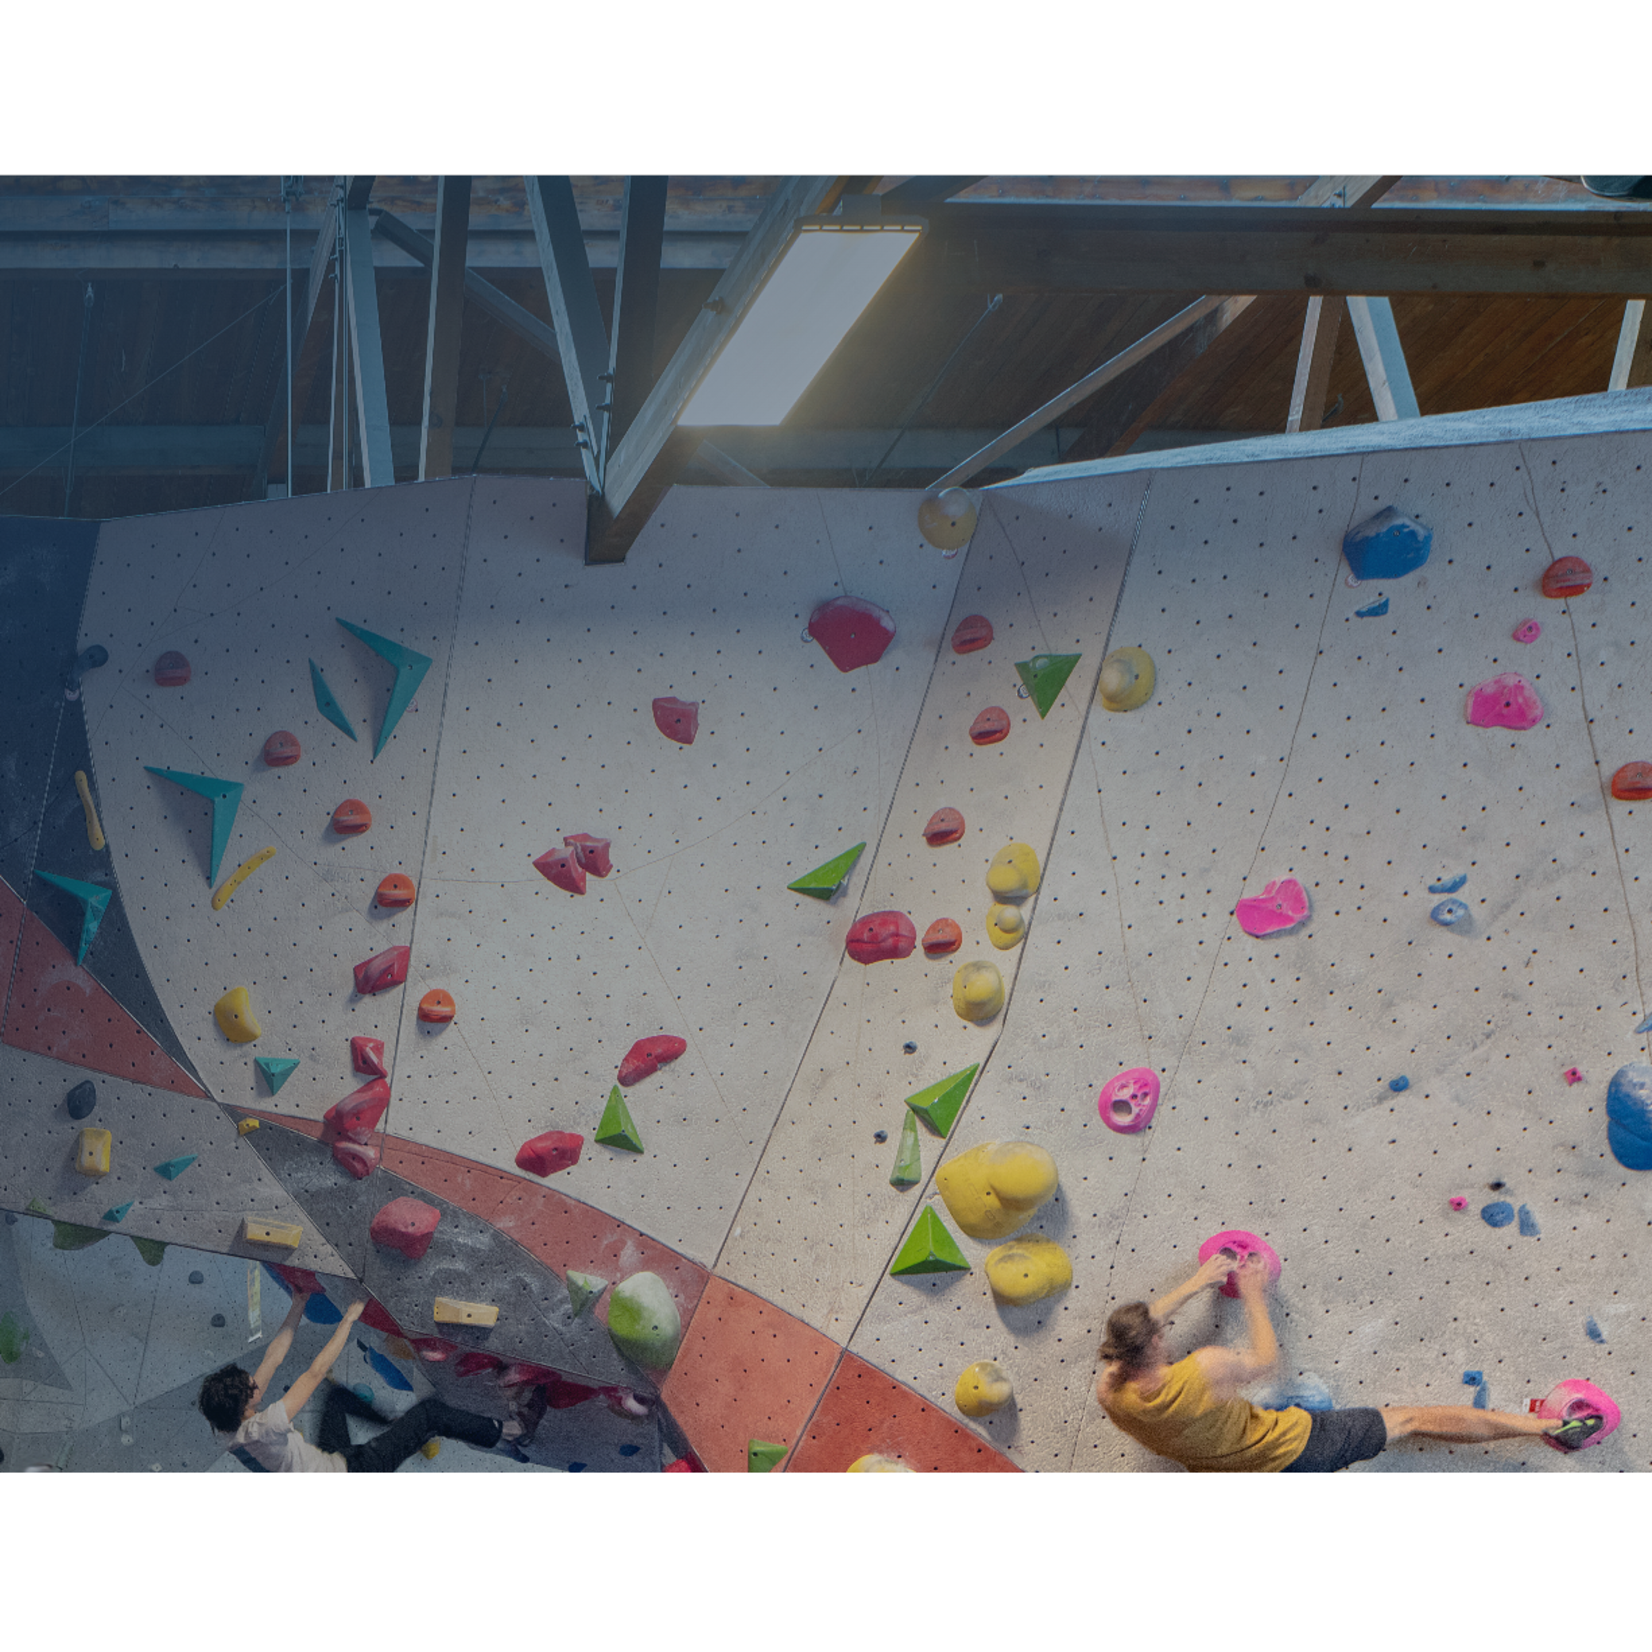 Vertical Endeavors Rock Climbing-Glendale Heights Vertical Endeavors Rock Climbing-Glendale Heights $35.00 Daily Admission w/Rental Package